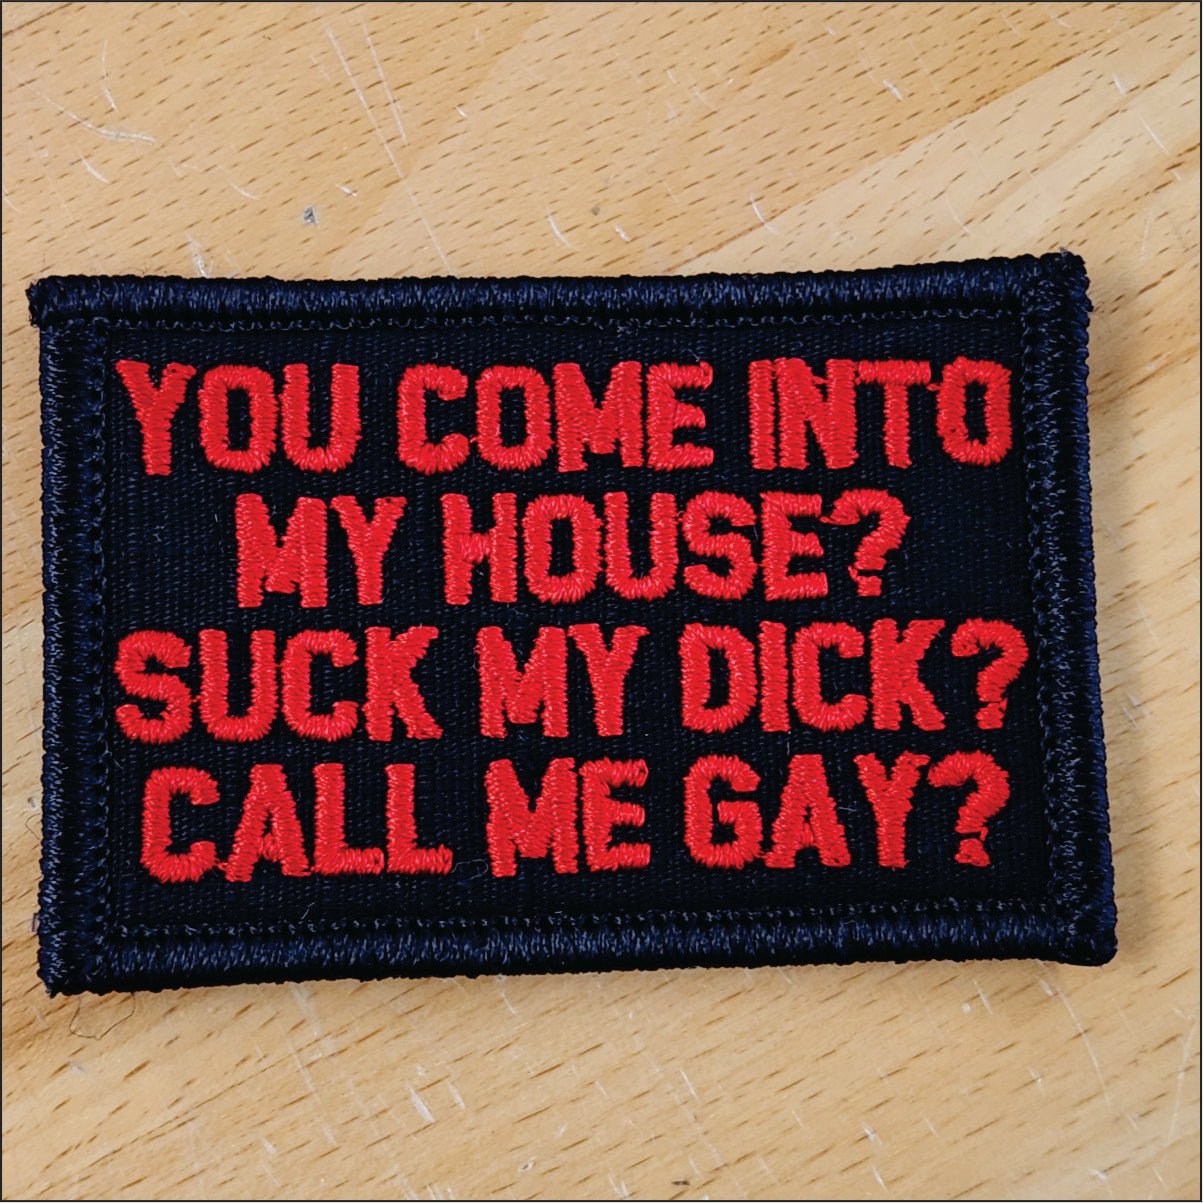 As Seen on Socials - You Come Into My House? Suck My Dick? Call Me Gay? - 2x3 Patch